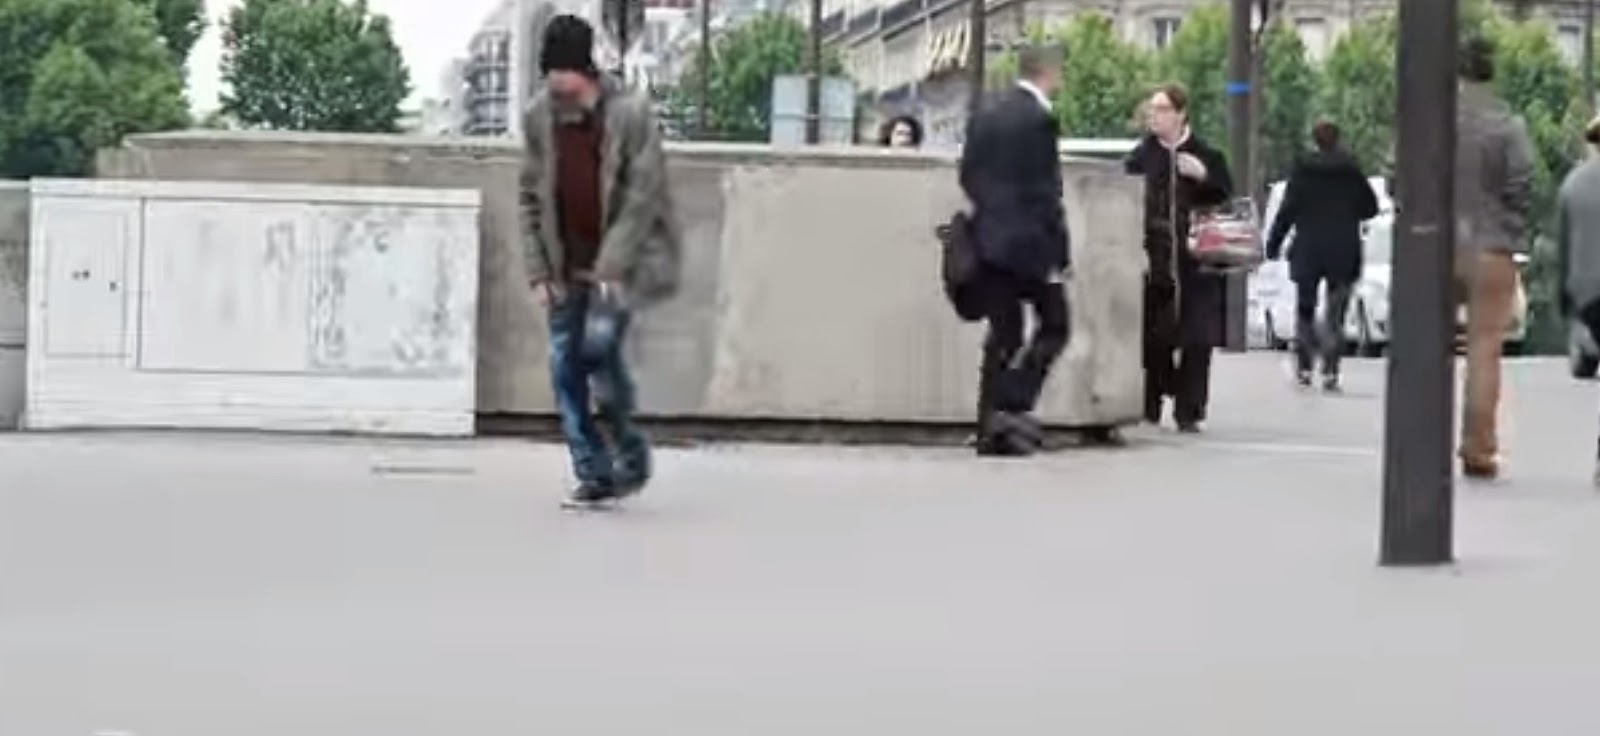 Homeless Guy in Trouble